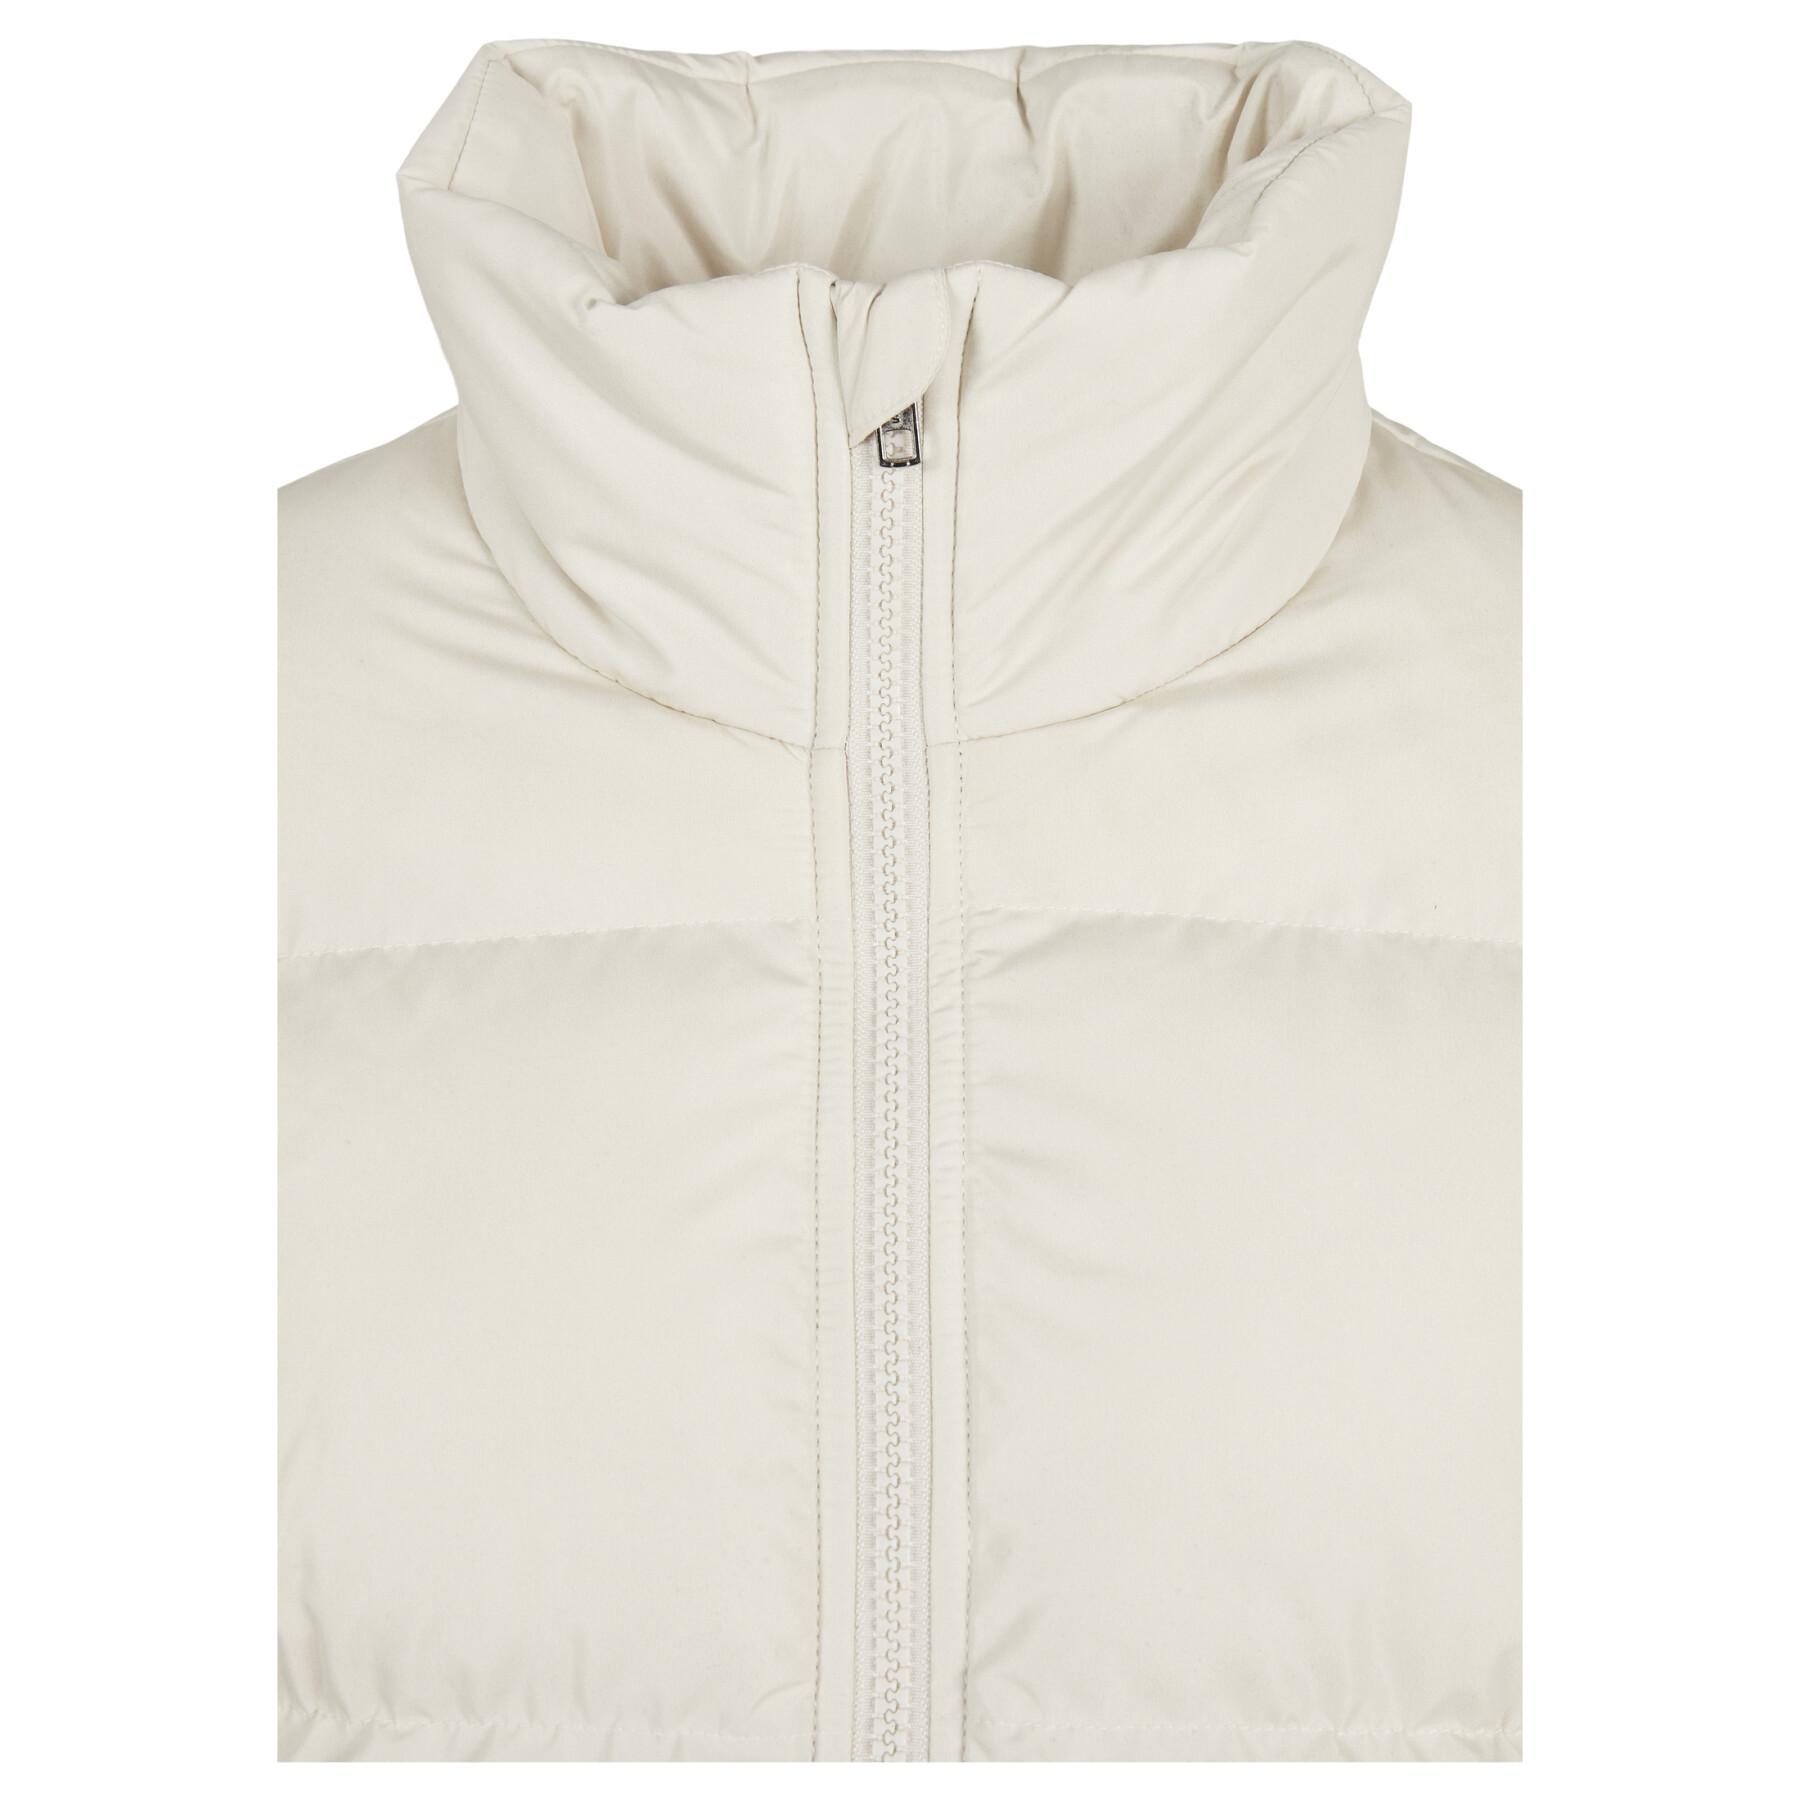 Quilted  jacket for women Urban Classics GT